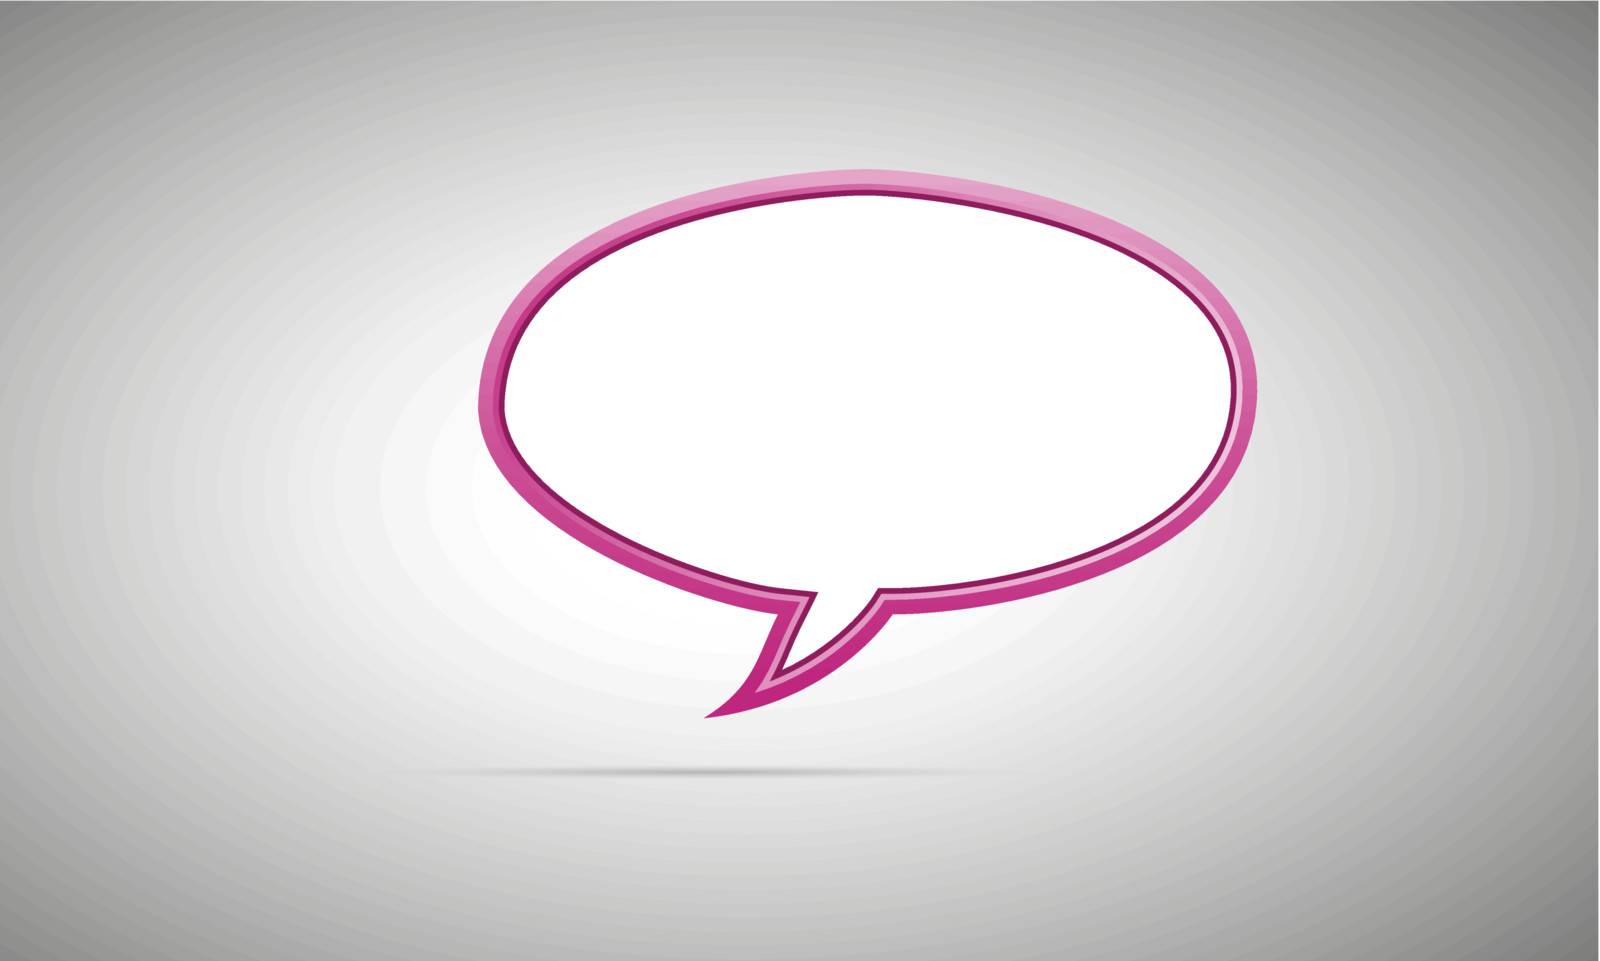 Blank isolated speech bubble ready for your text